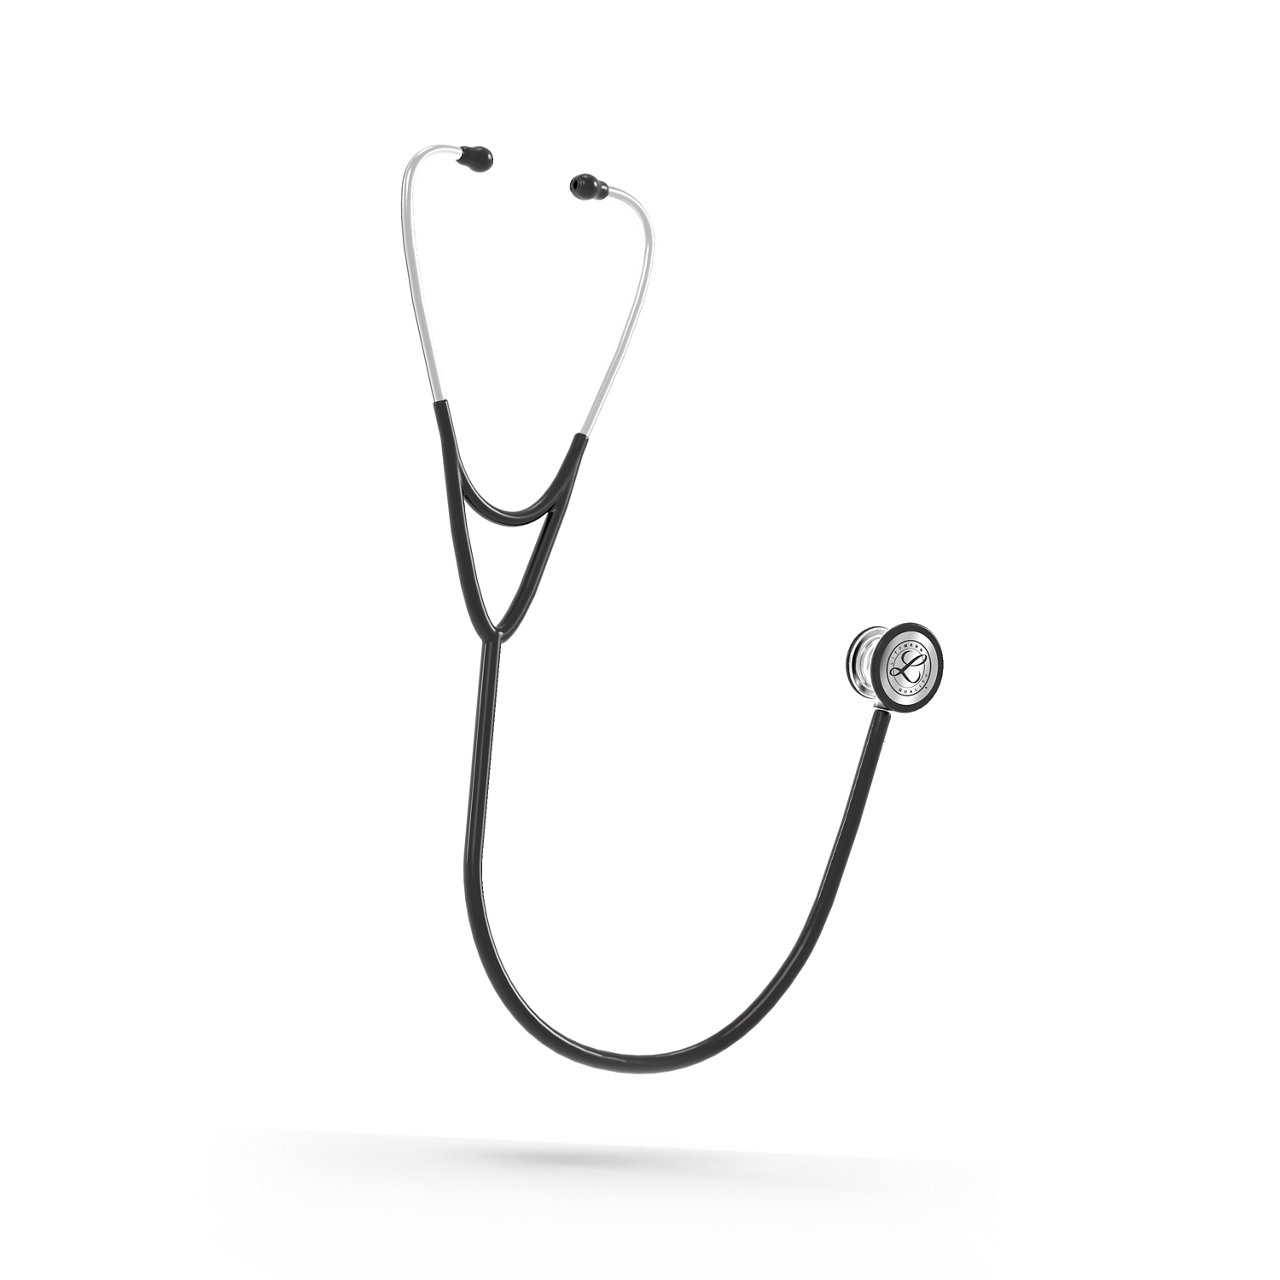 Rendered image of the 3M� Littmann� Cardiology IV� Diagnostic Stethoscope  from a 3/4 view